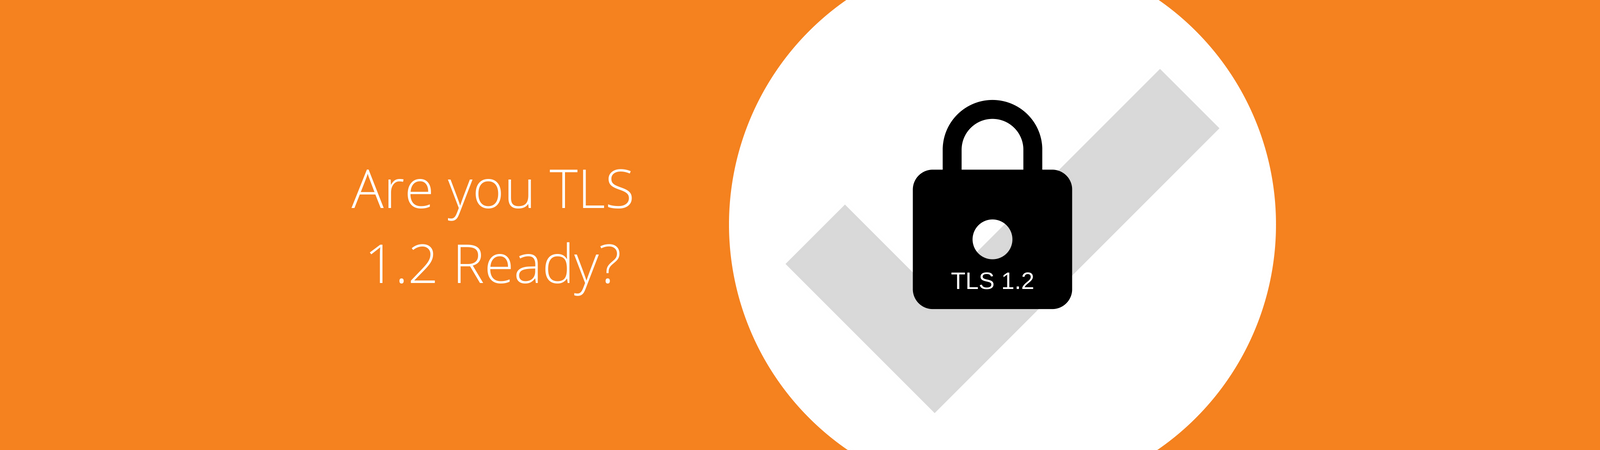 TLS 1.2 and what it means for you